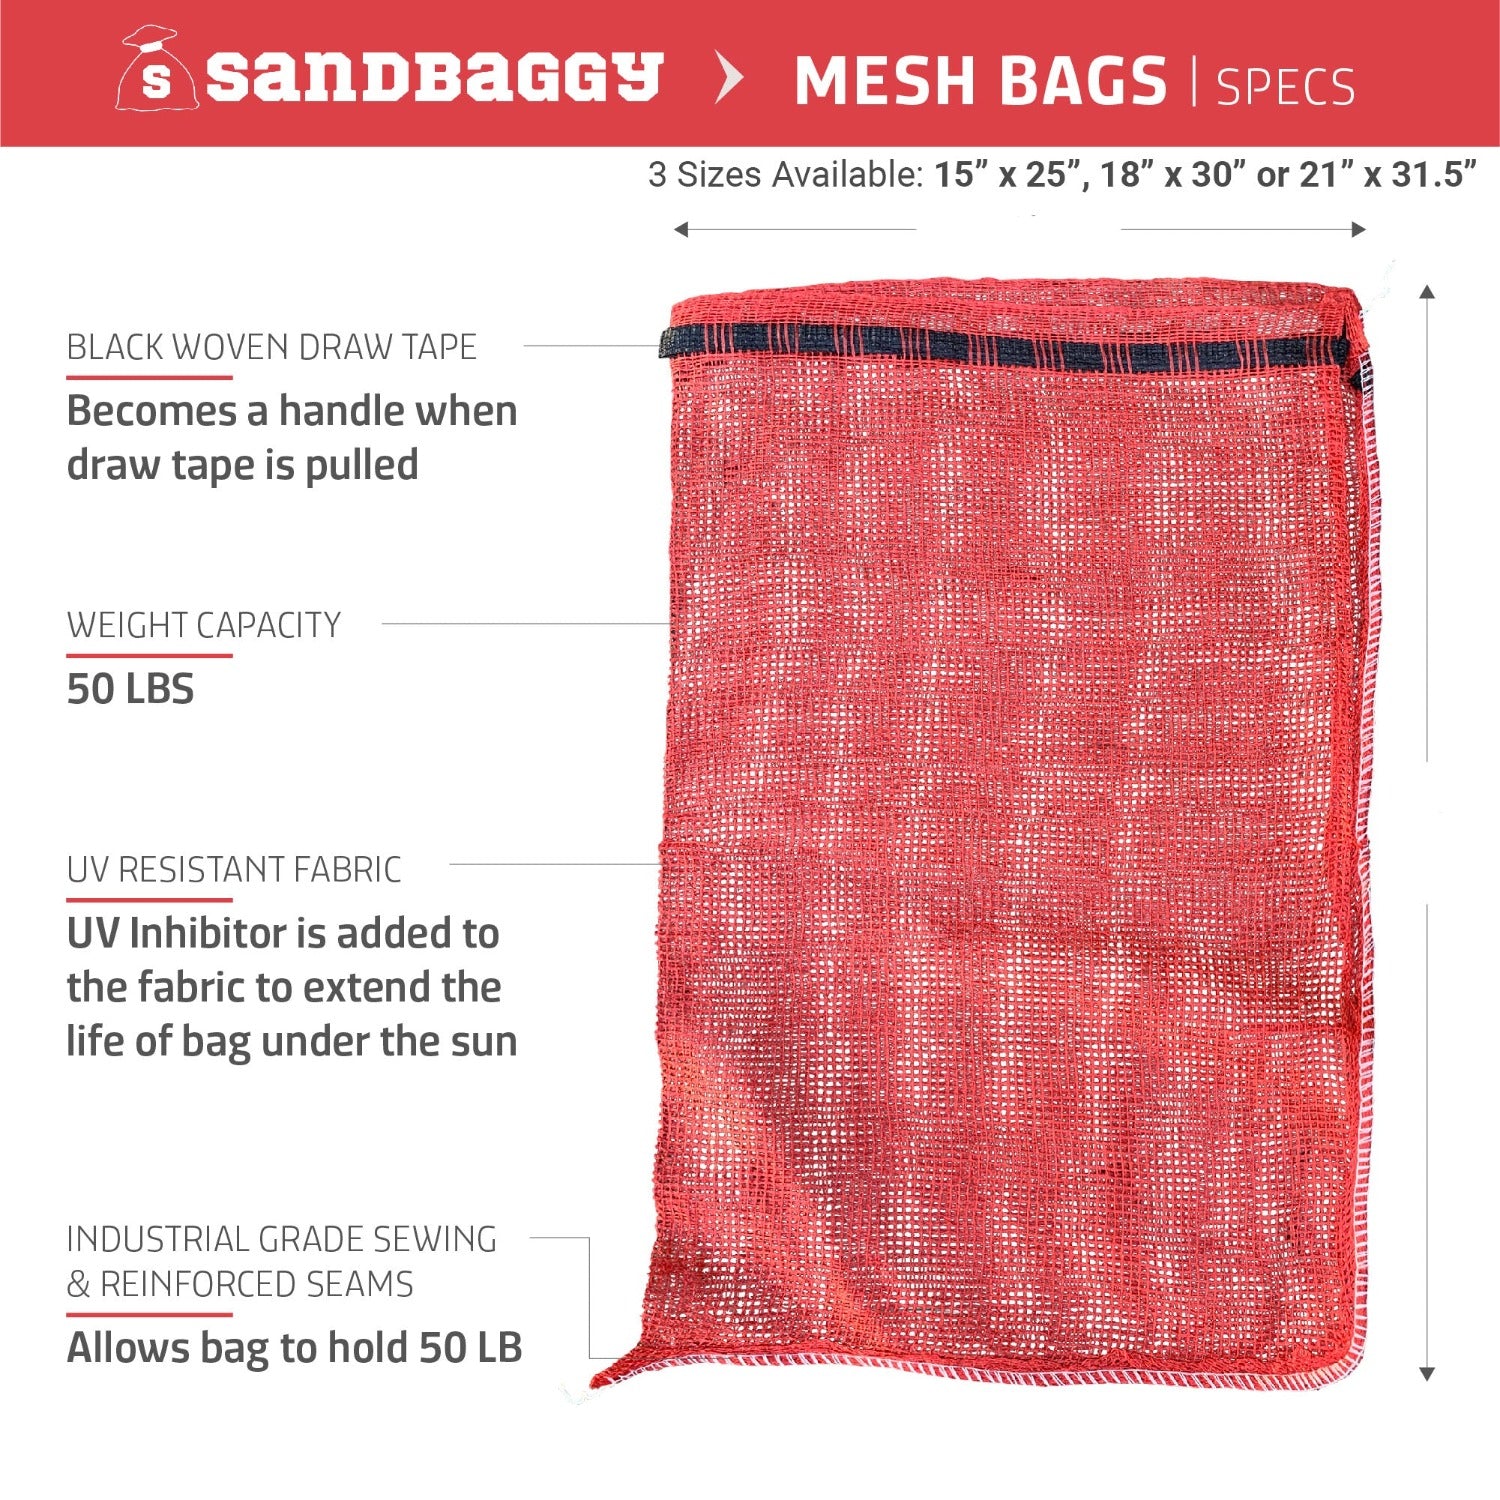 Commercial Quality Mesh Laundry Bag, Laundry Bags & Carts